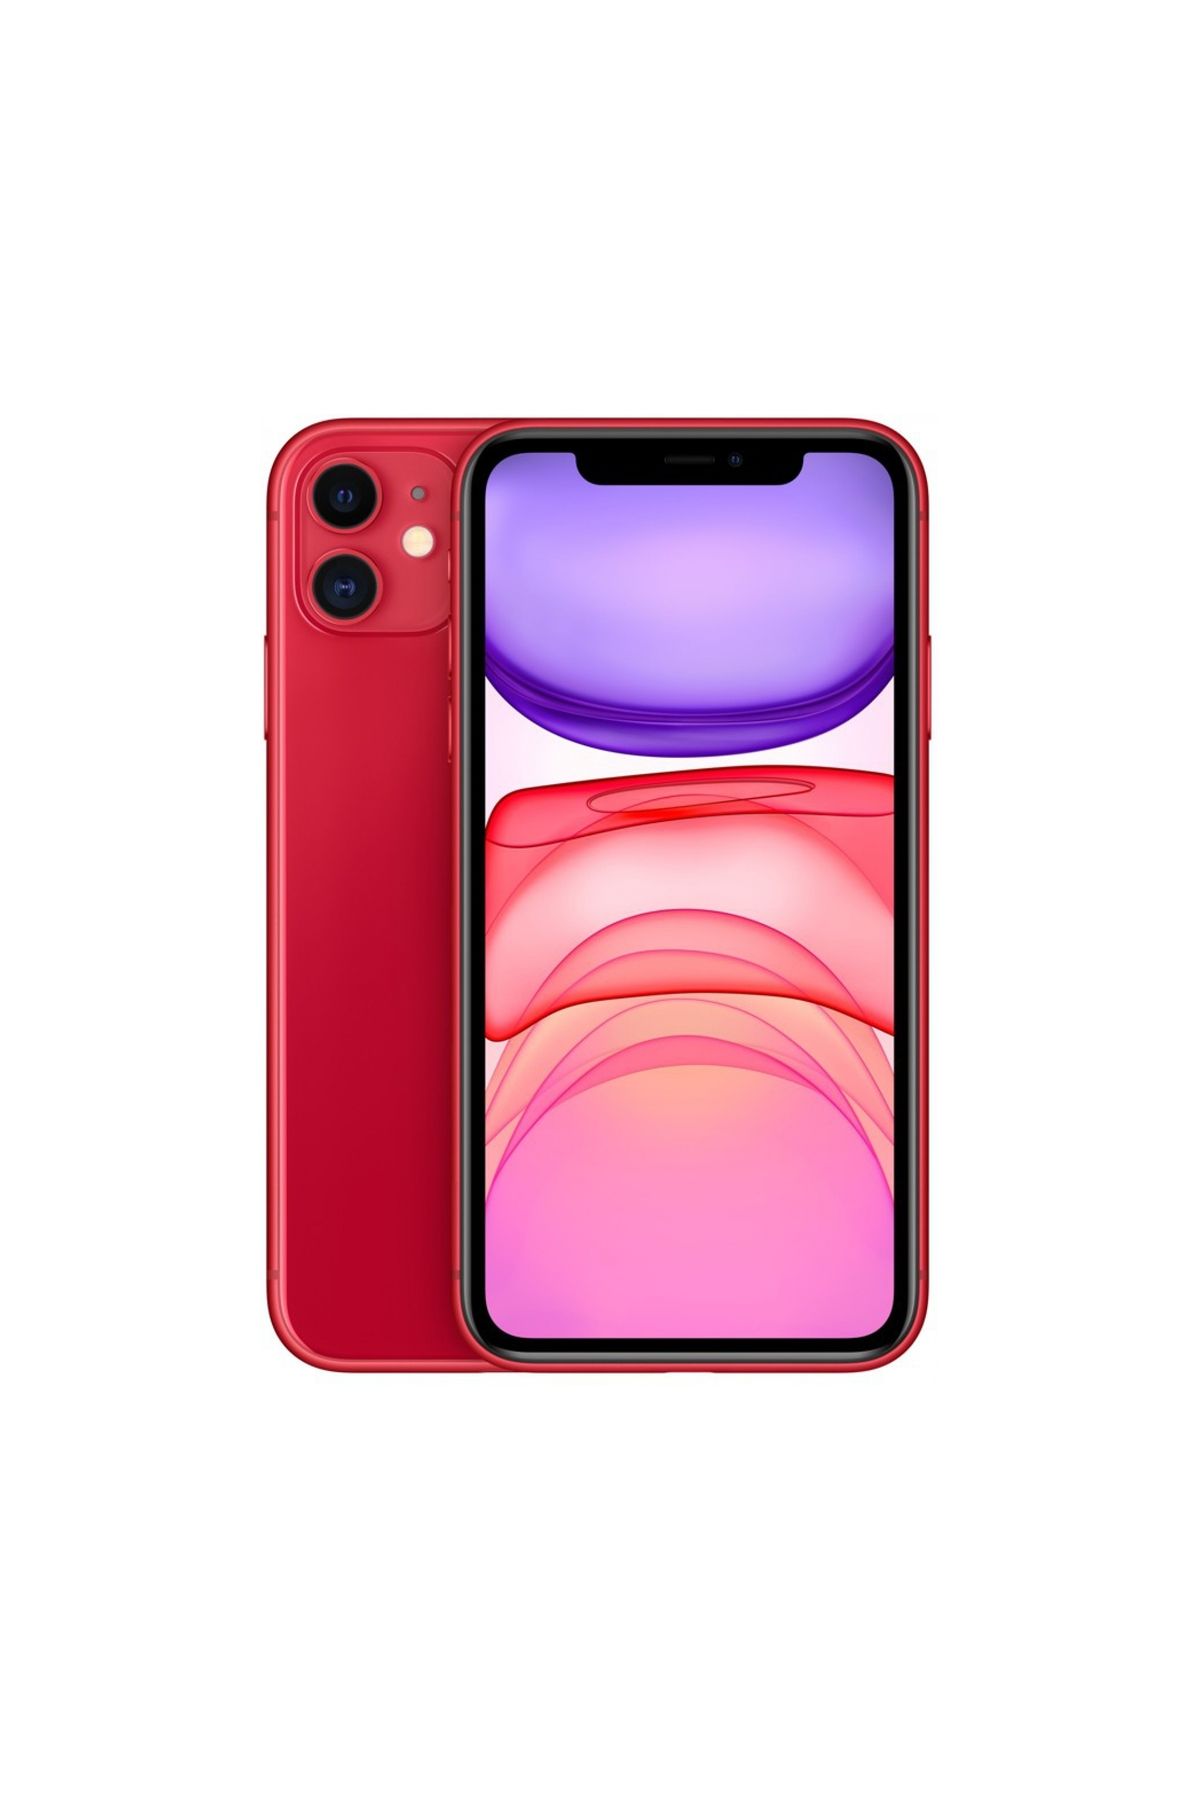 Apple iPhone 11 128GB (PRODUCT)RED - Yenilenmis - A Kalite